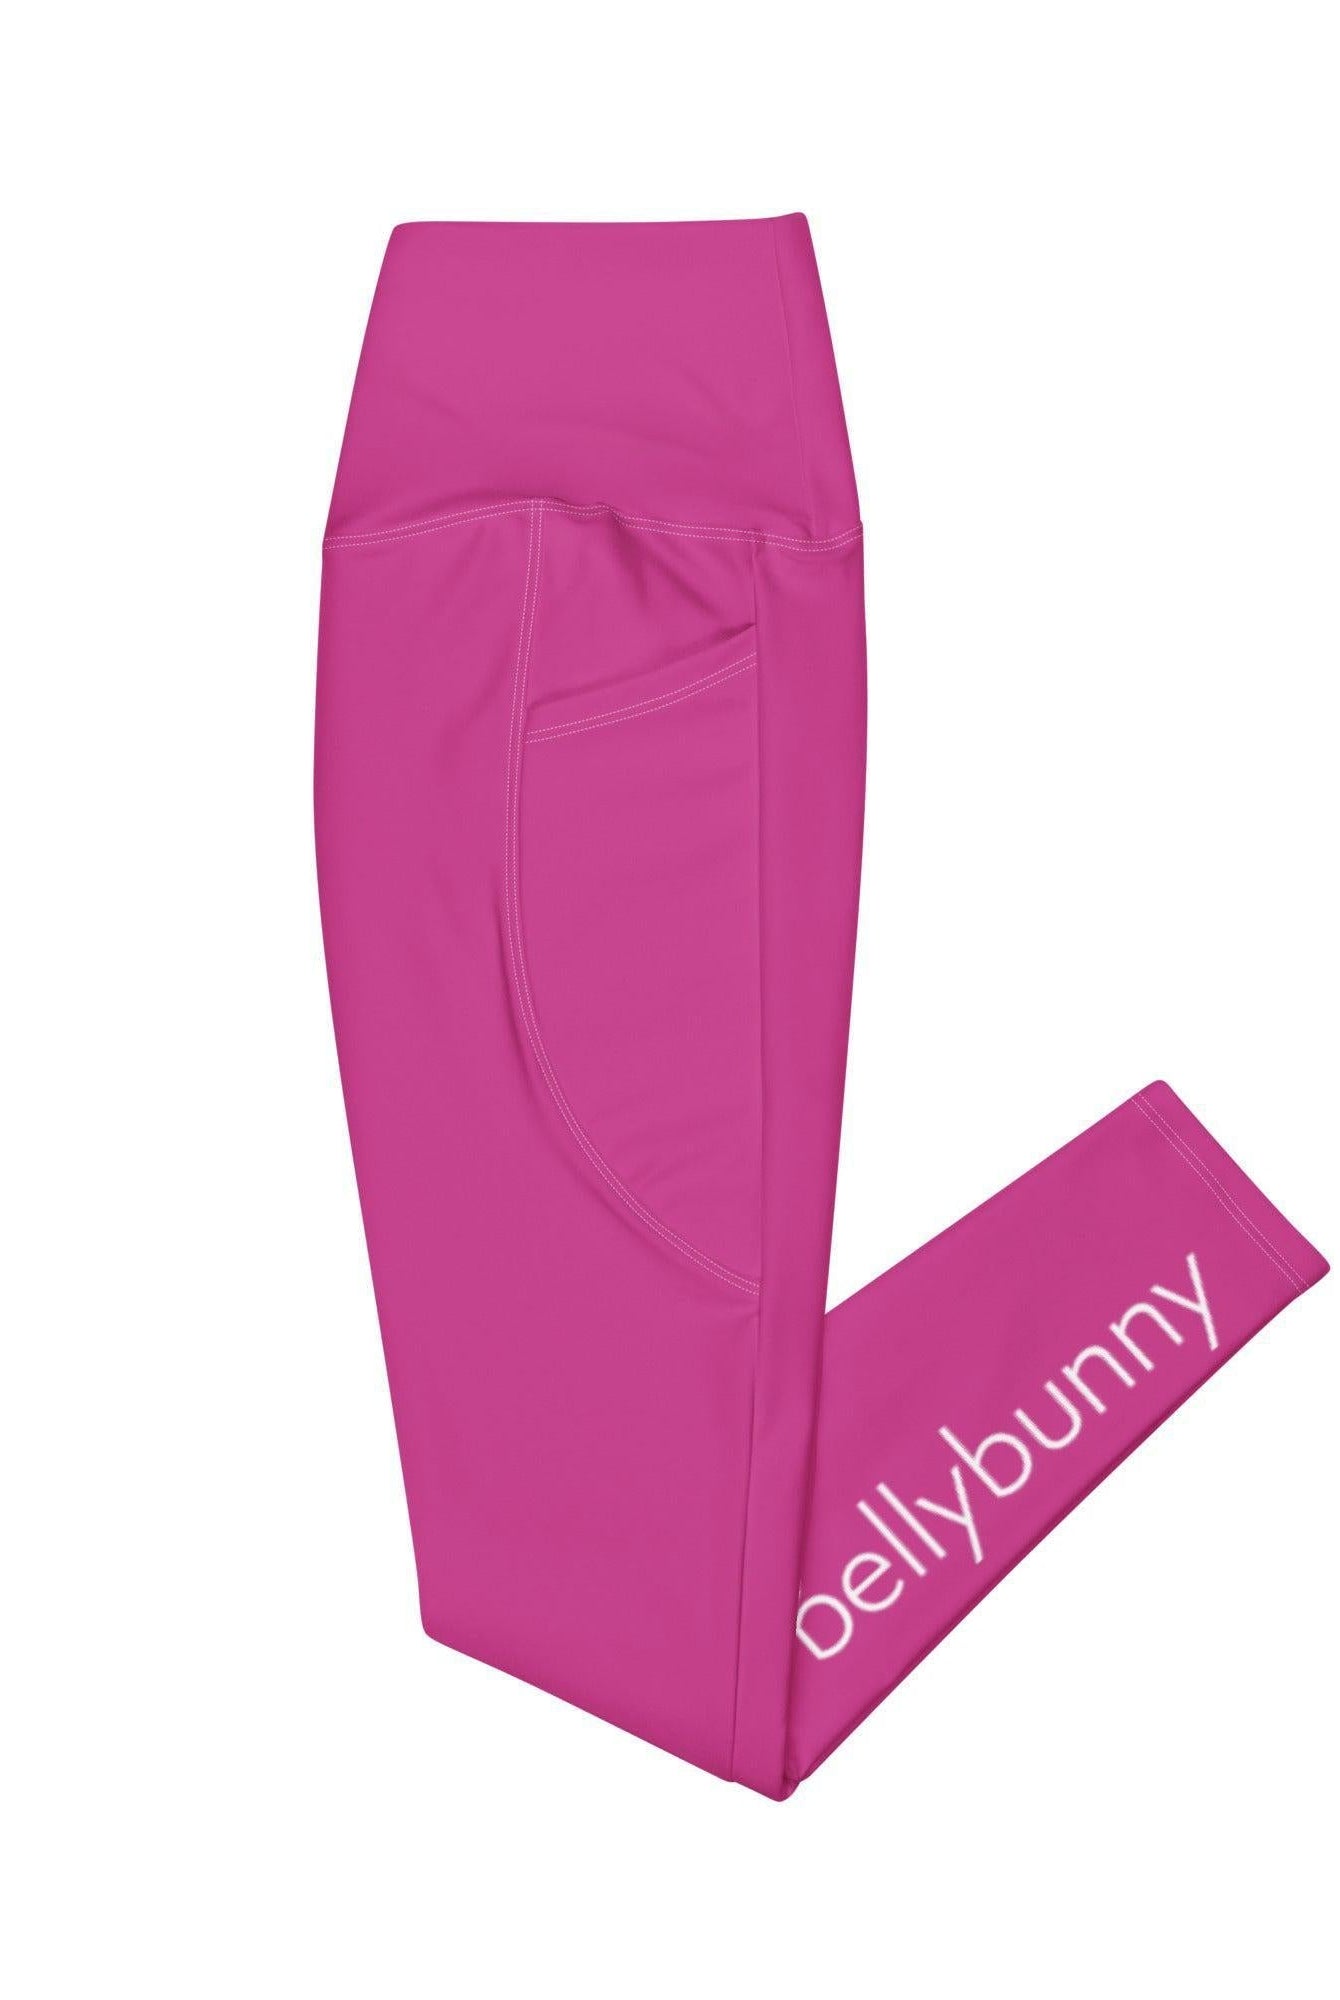 Bellybunny-Women's Crossover Leggings-Pink with White Logo